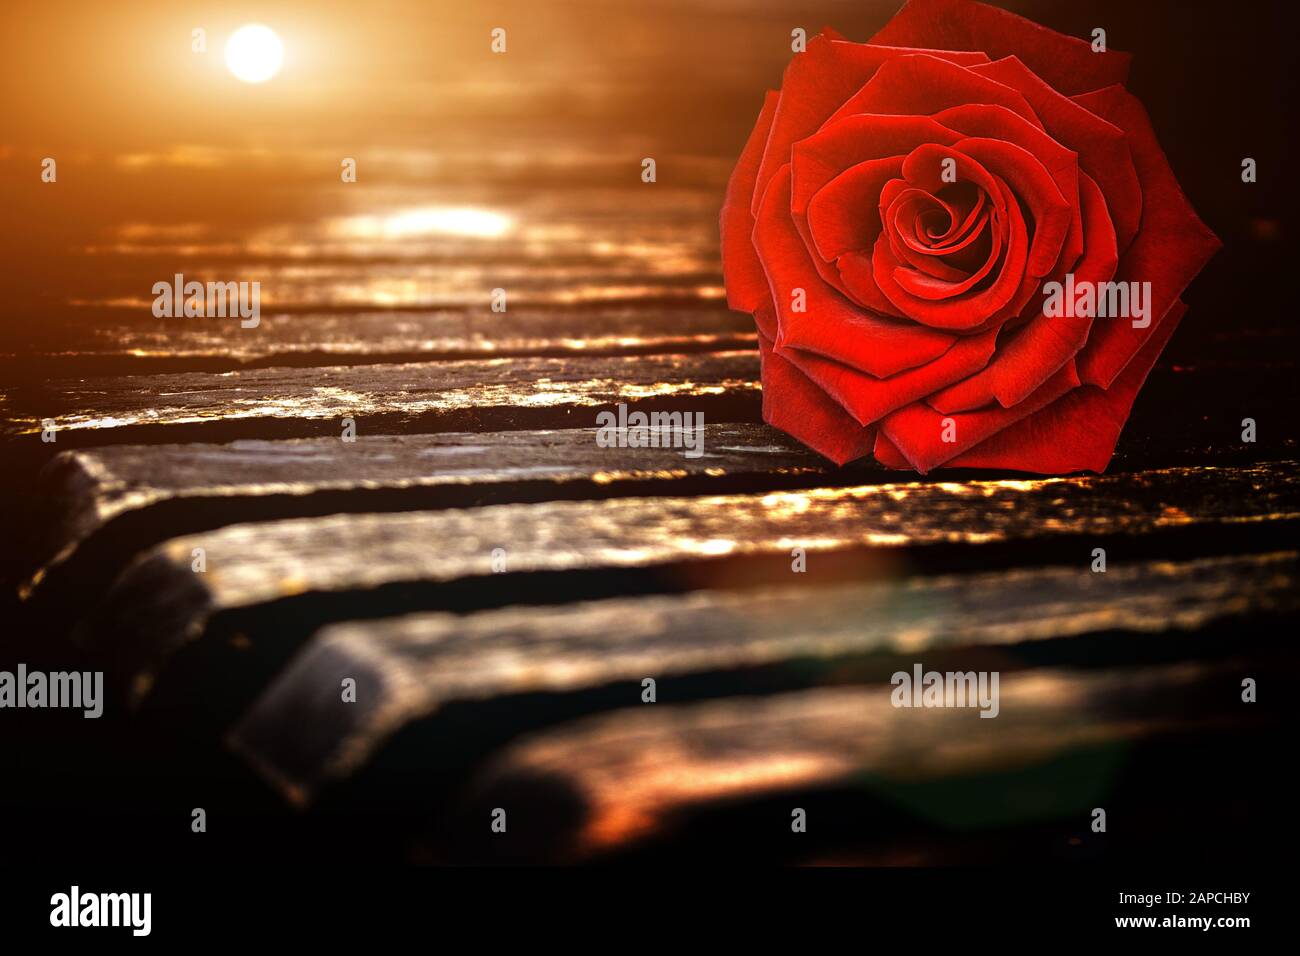 Red rose on a bench, outdoors Stock Photo